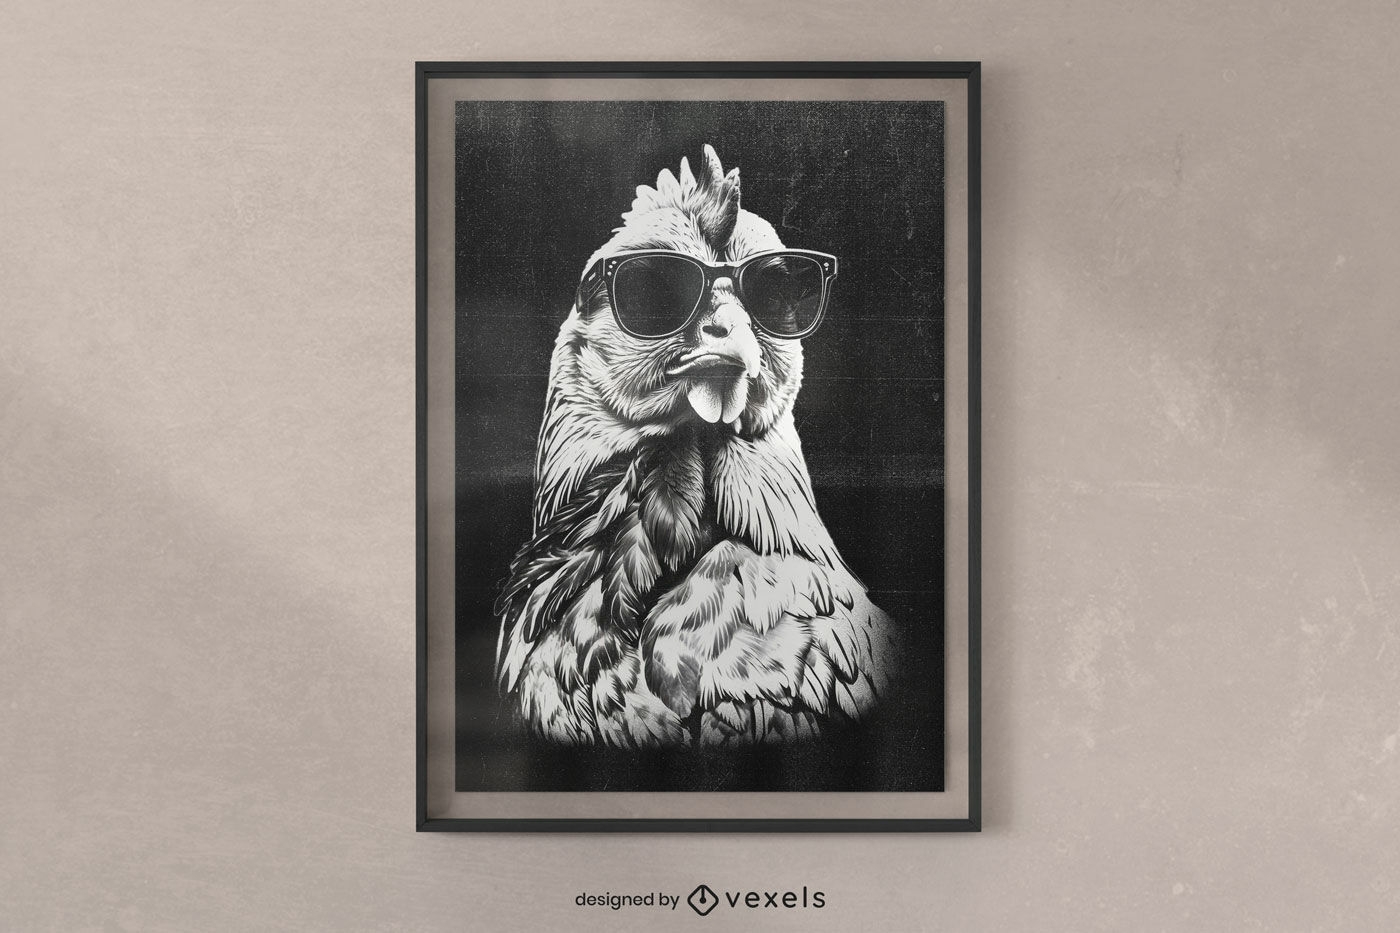 Chicken with sunglasses poster design